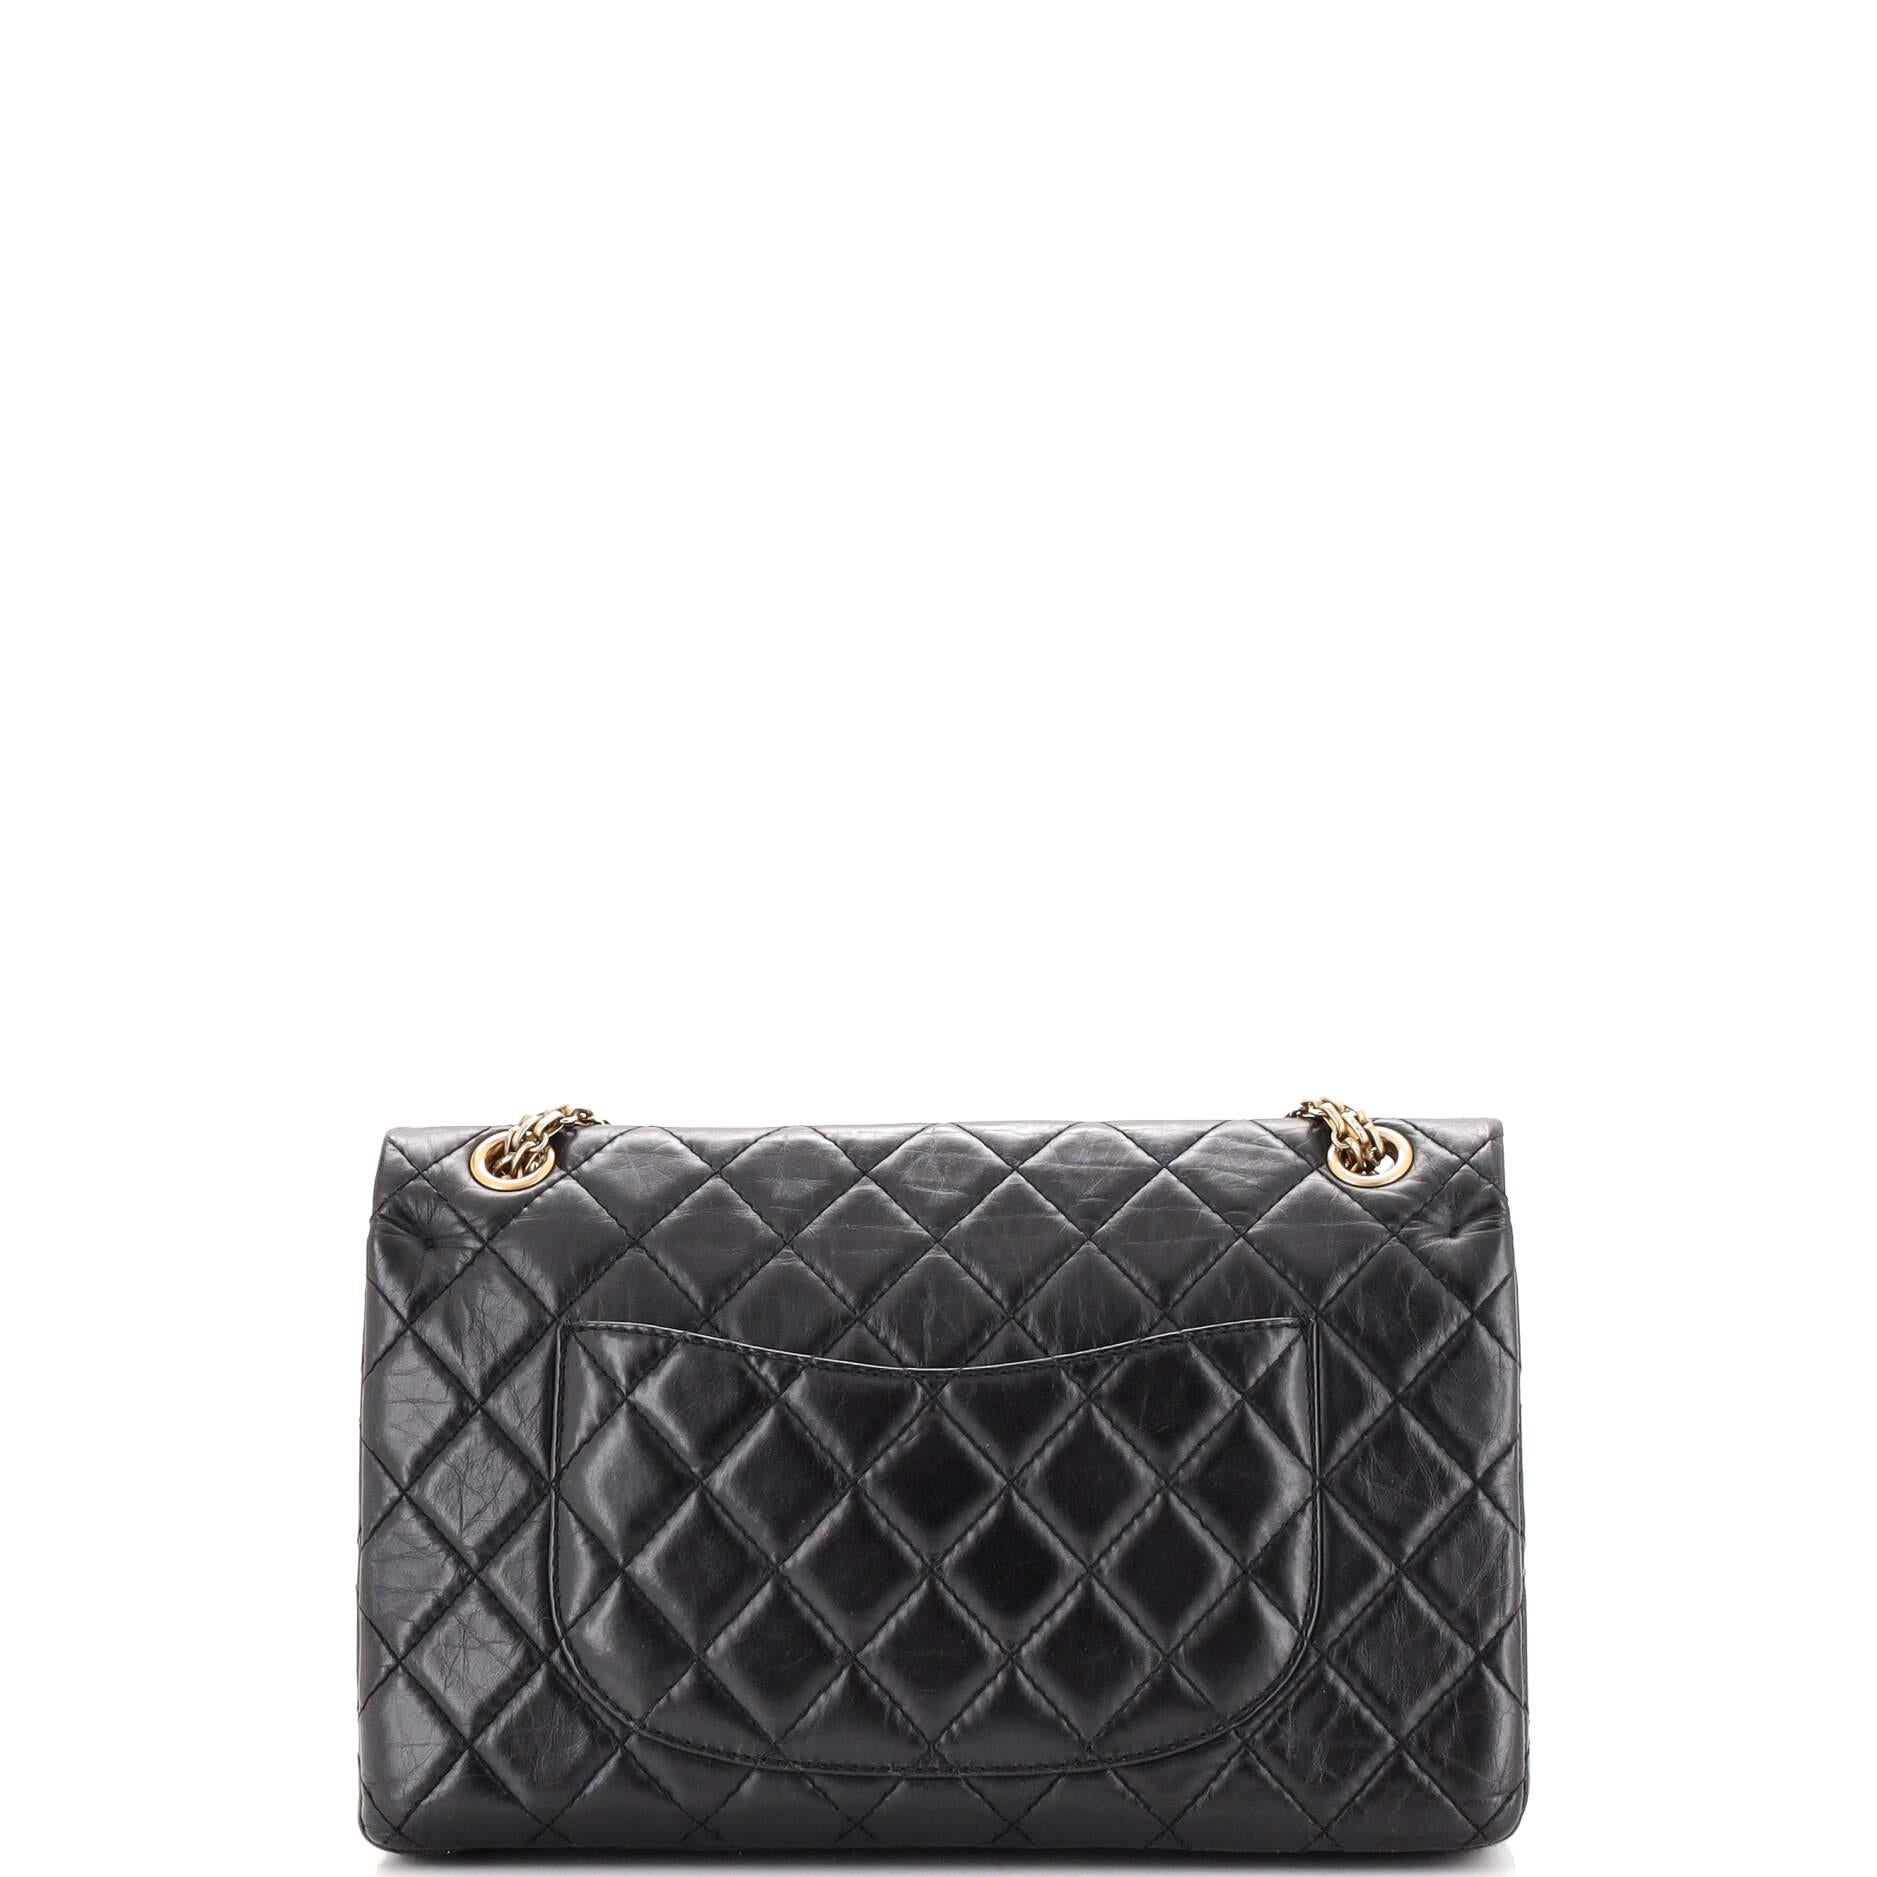 Women's Chanel Reissue 2.55 Flap Bag Quilted Aged Calfskin 226